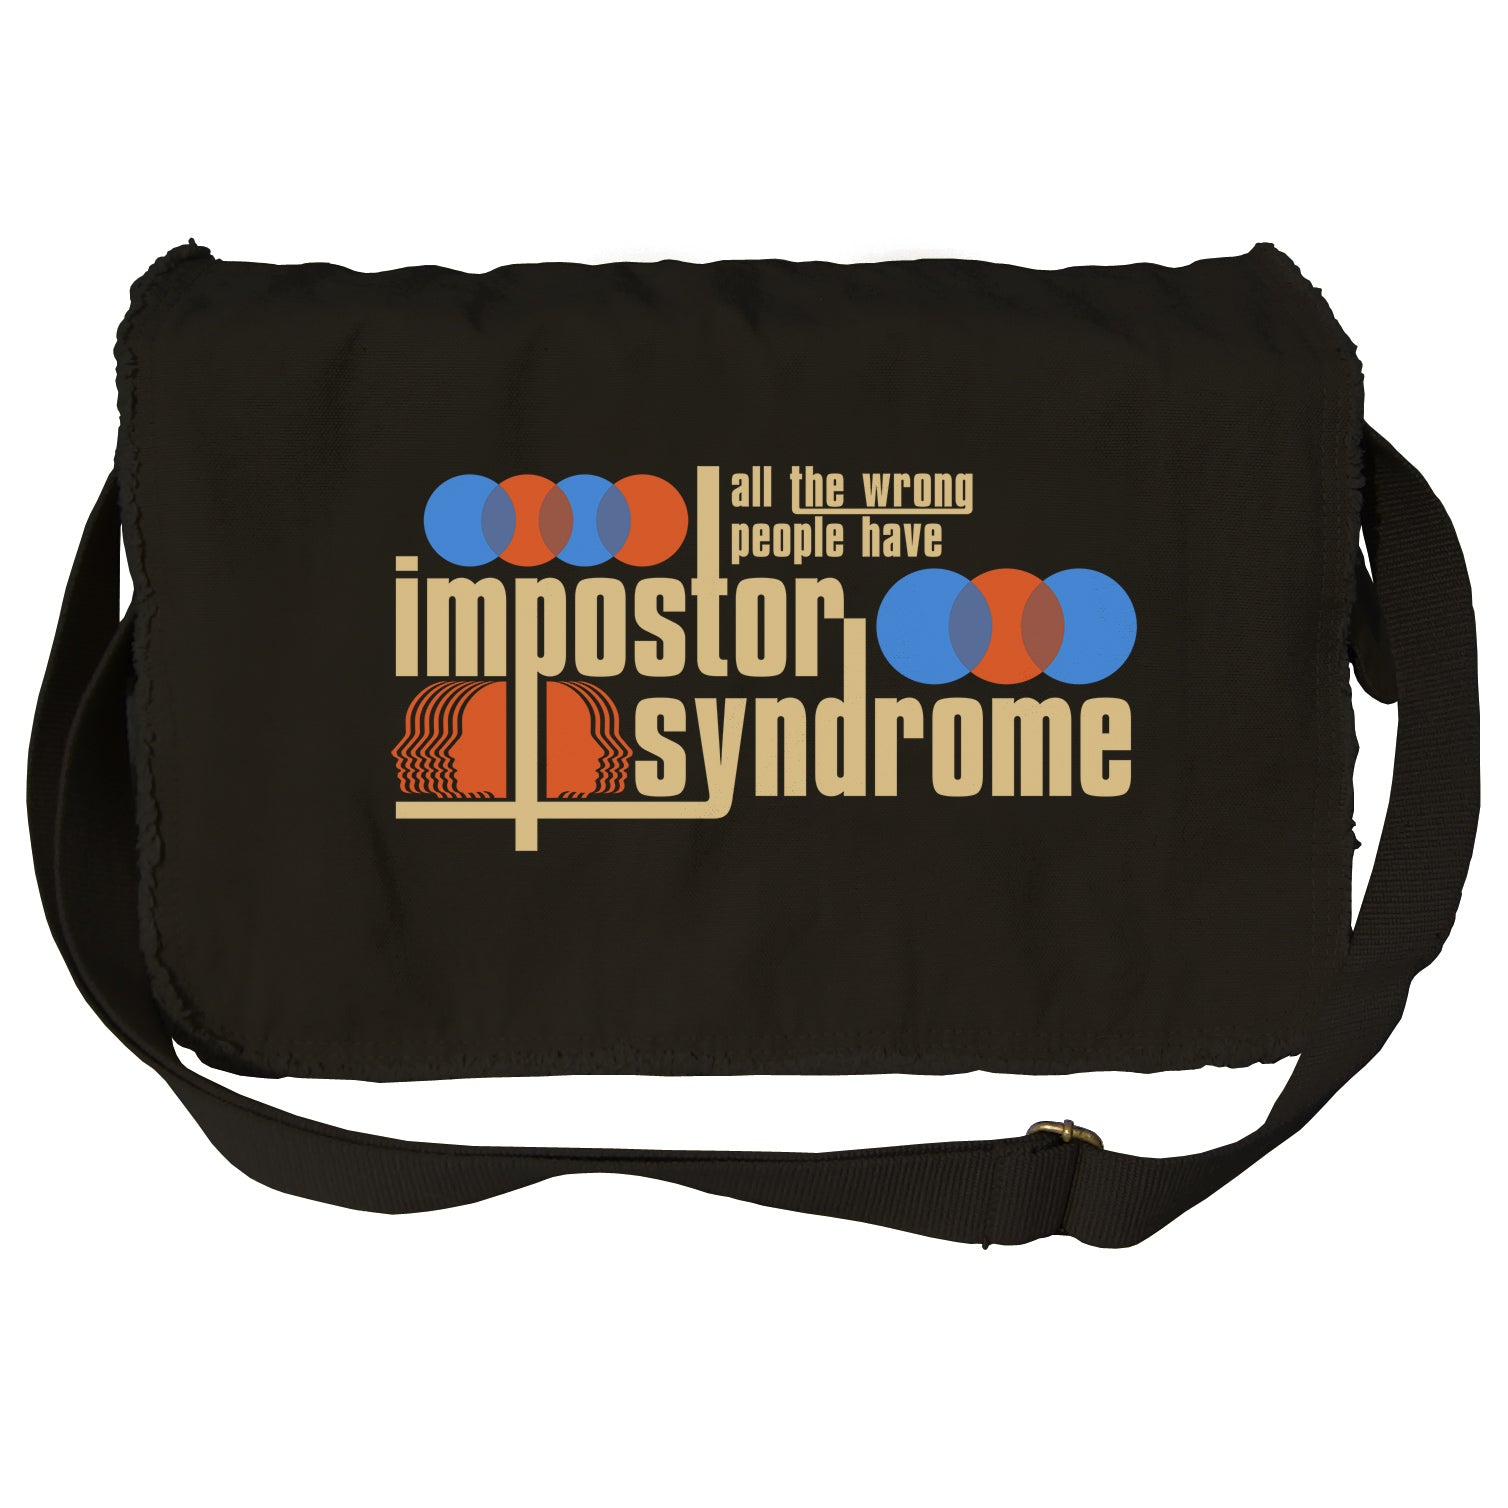 All The Wrong People Have Impostor Syndrome Messenger Bag